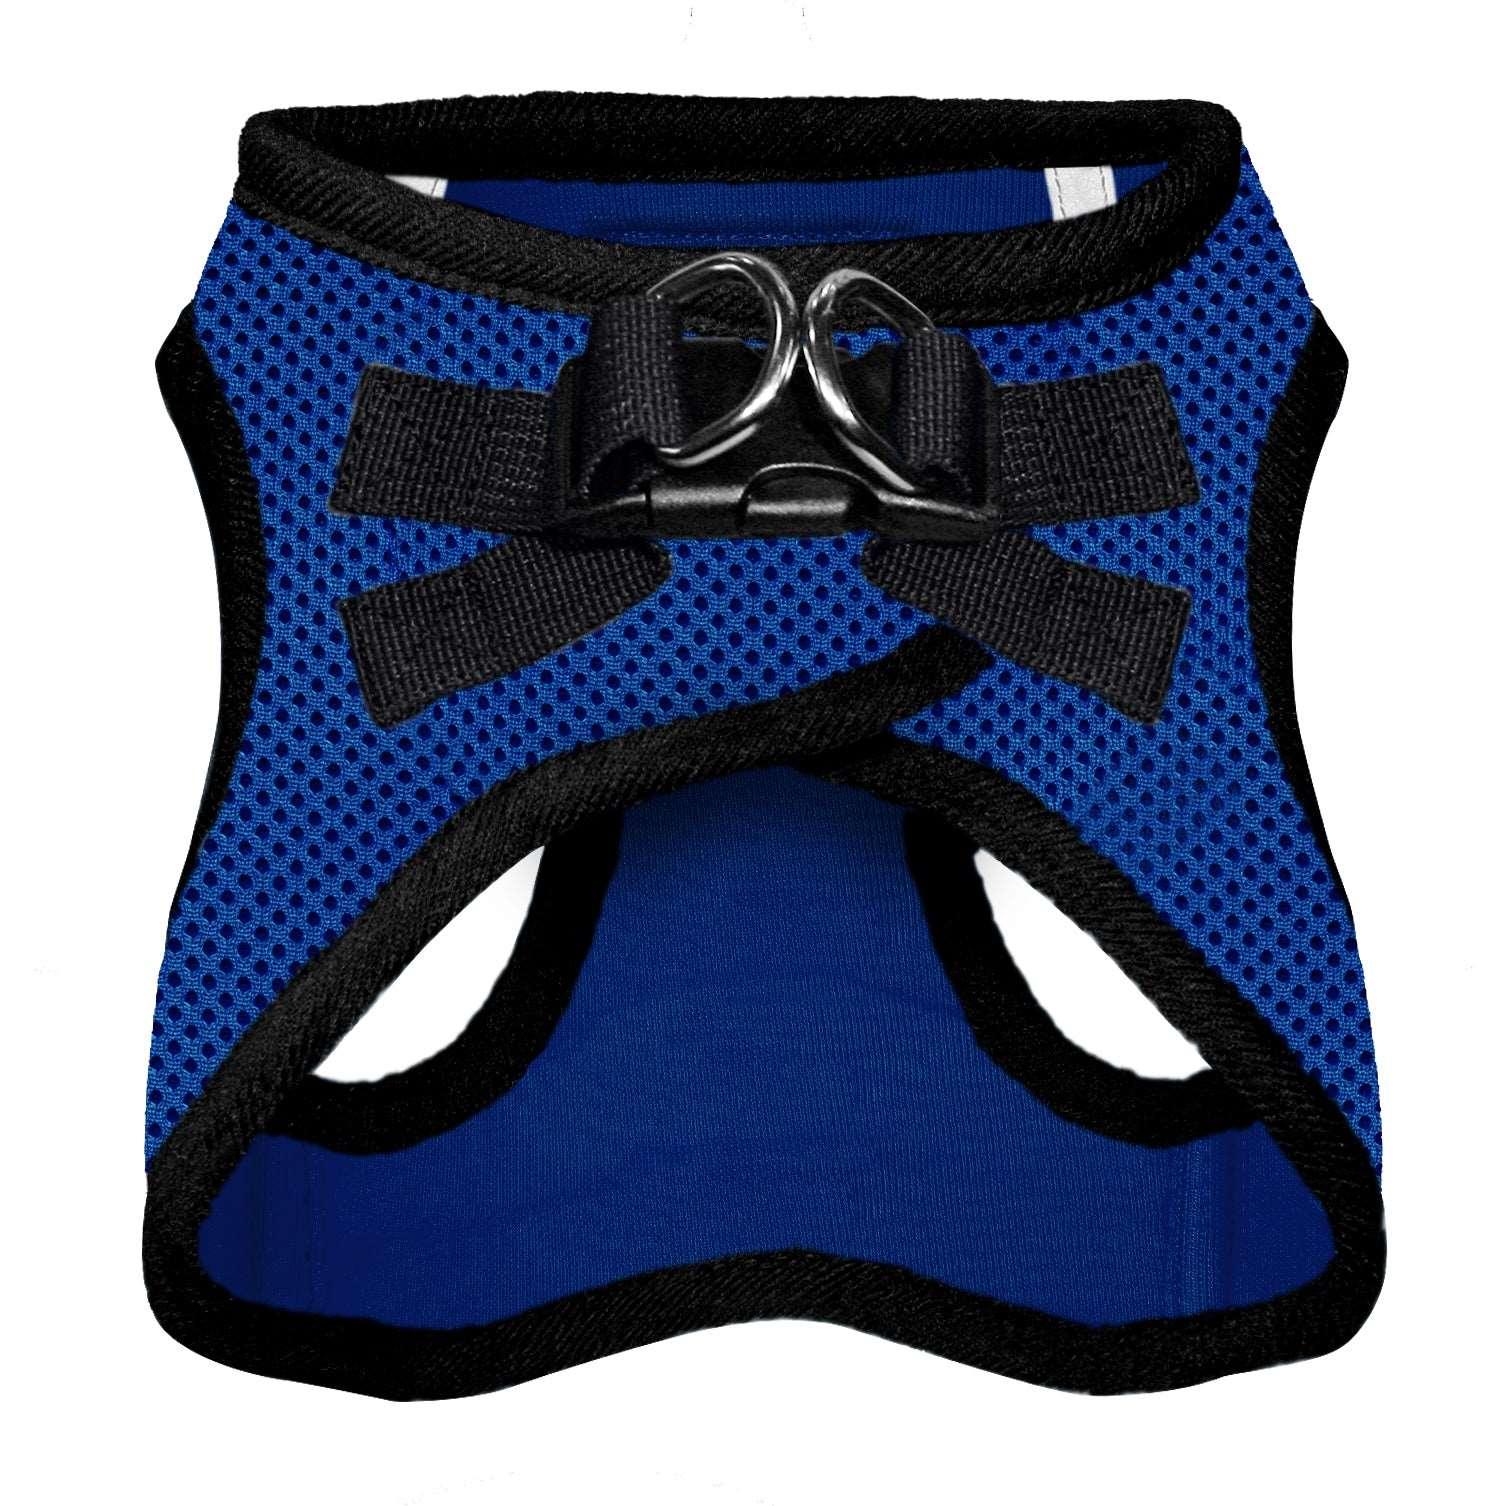 VOYAGER Step-In Air Pet Harness in Royal Blue with Black Trim - Back